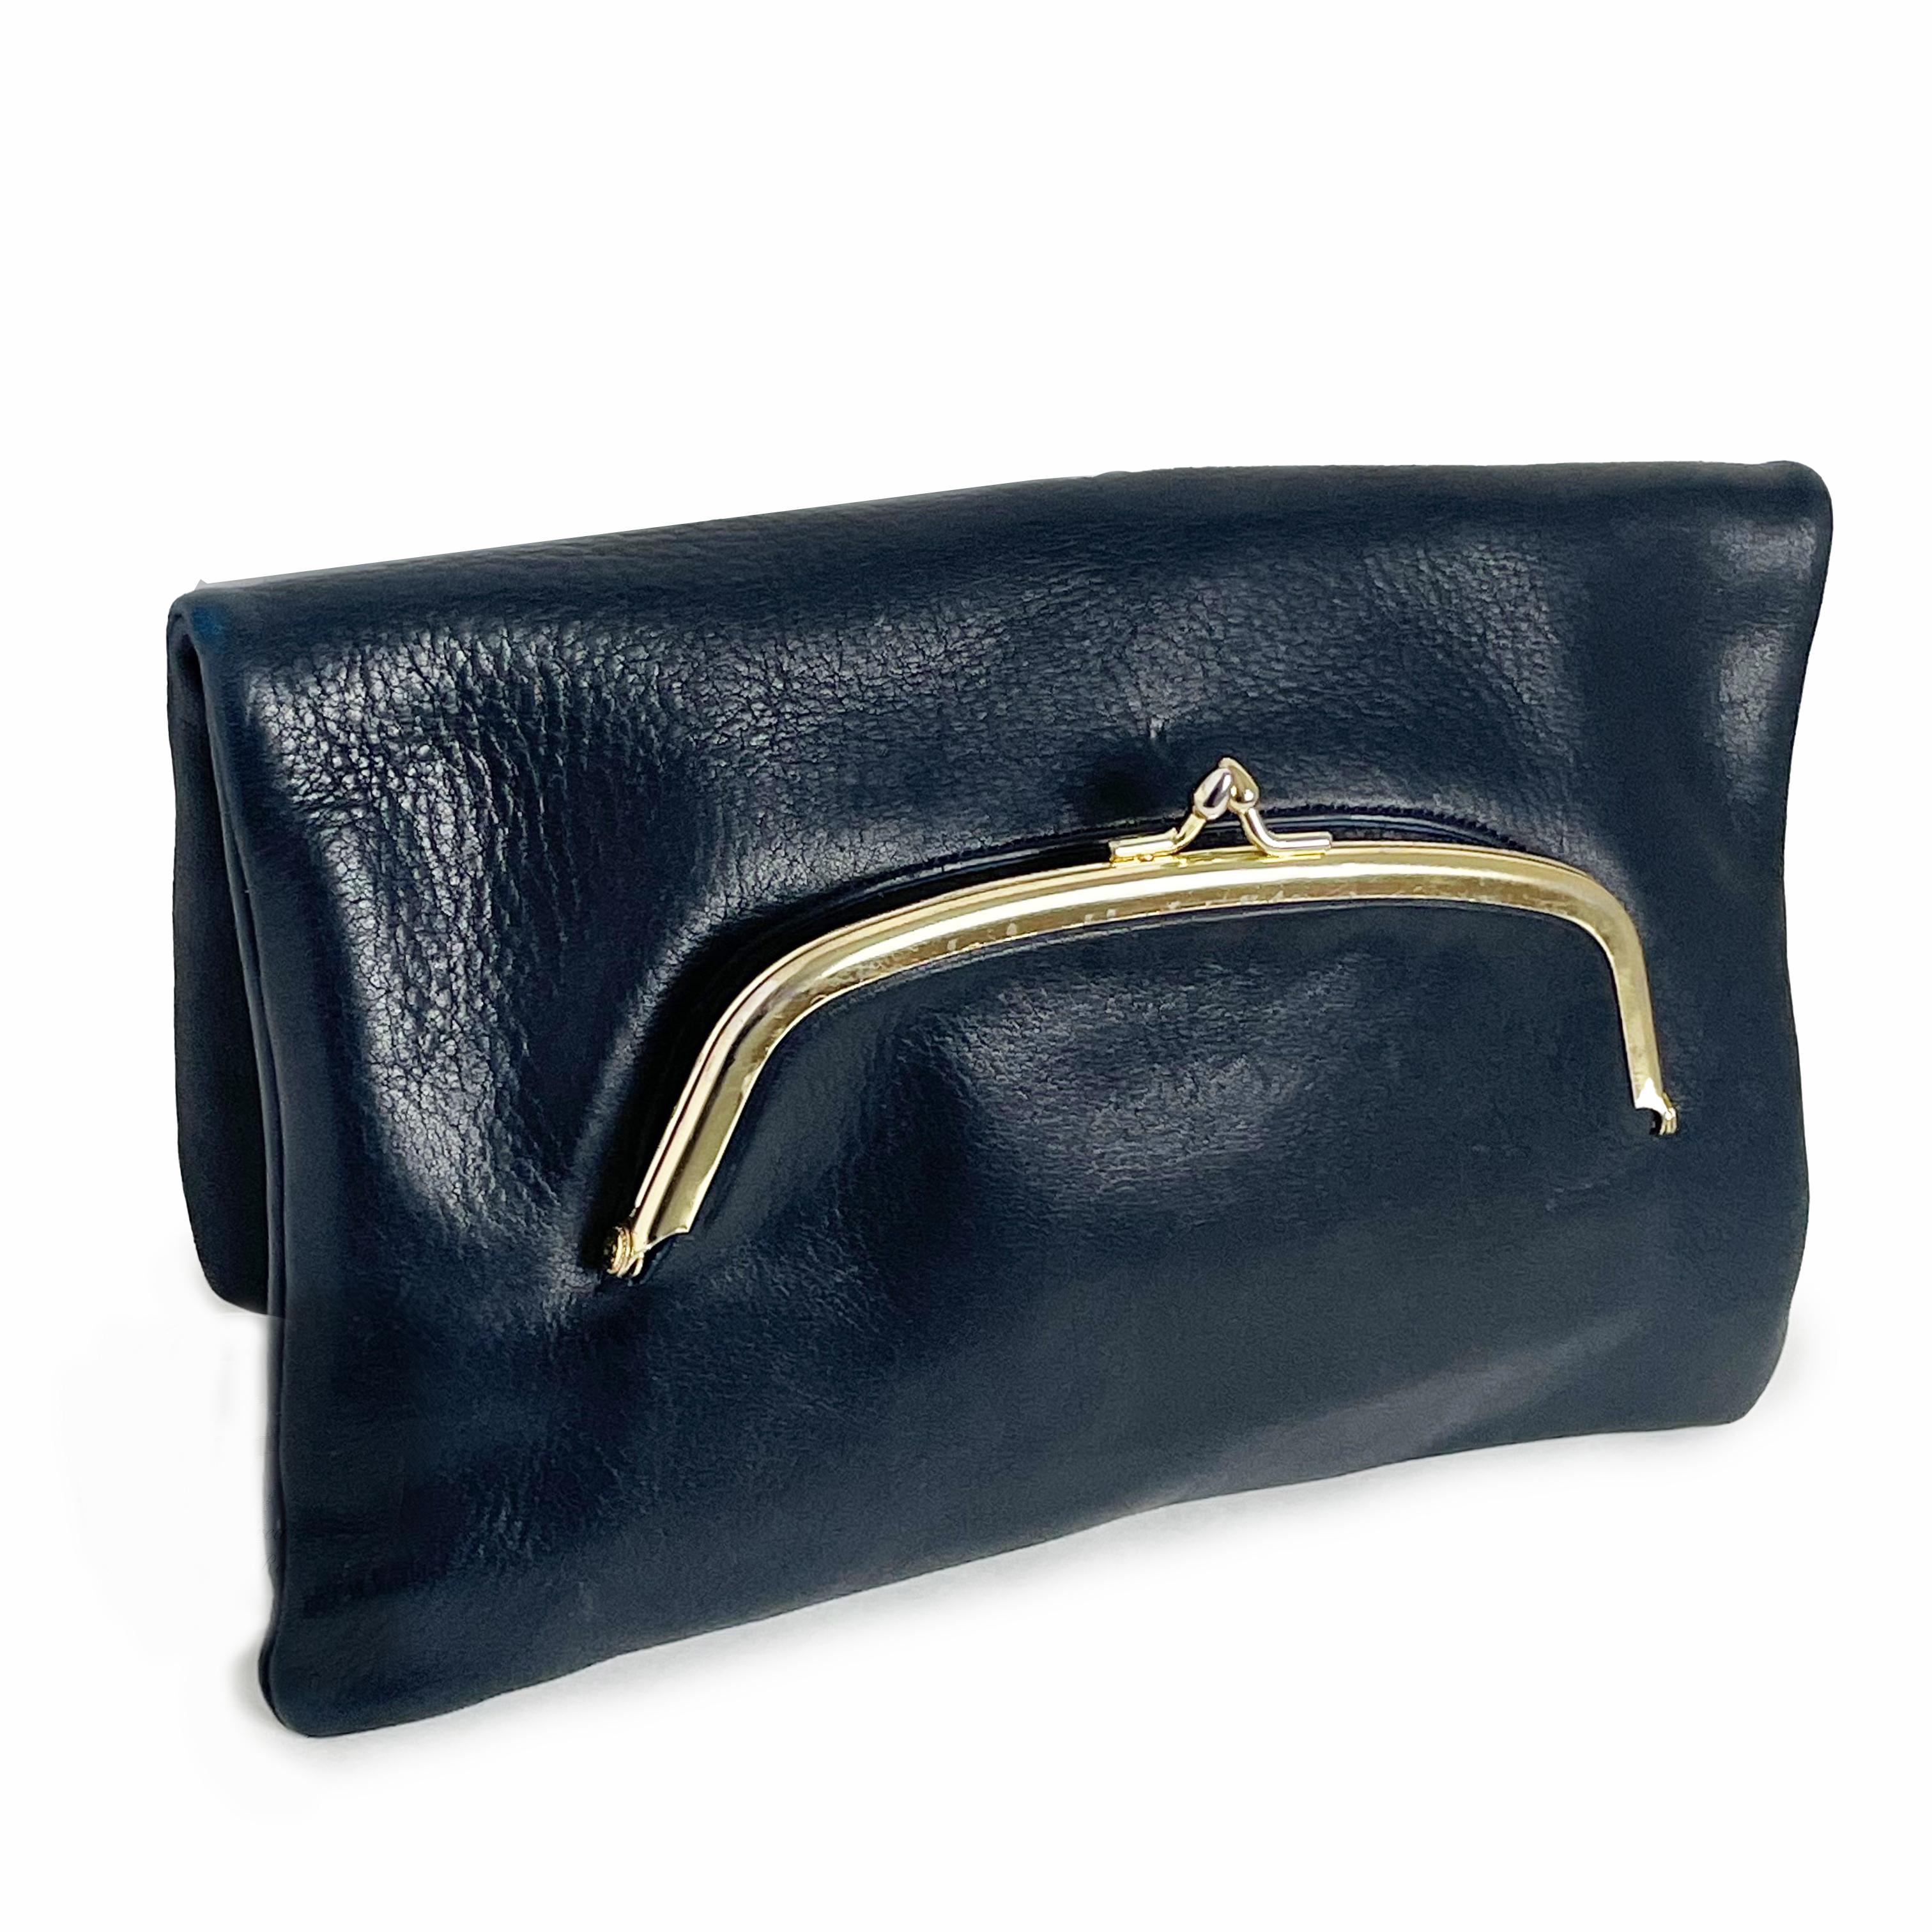 Authentic, preowned, 70s Bonnie Cashin for Coach bag clutch with kiss lock.  Made from a supple blue textured leather, this rare clutch is square-shaped with fold over styling and features a handy little kiss lock pocket in front!  The interior is